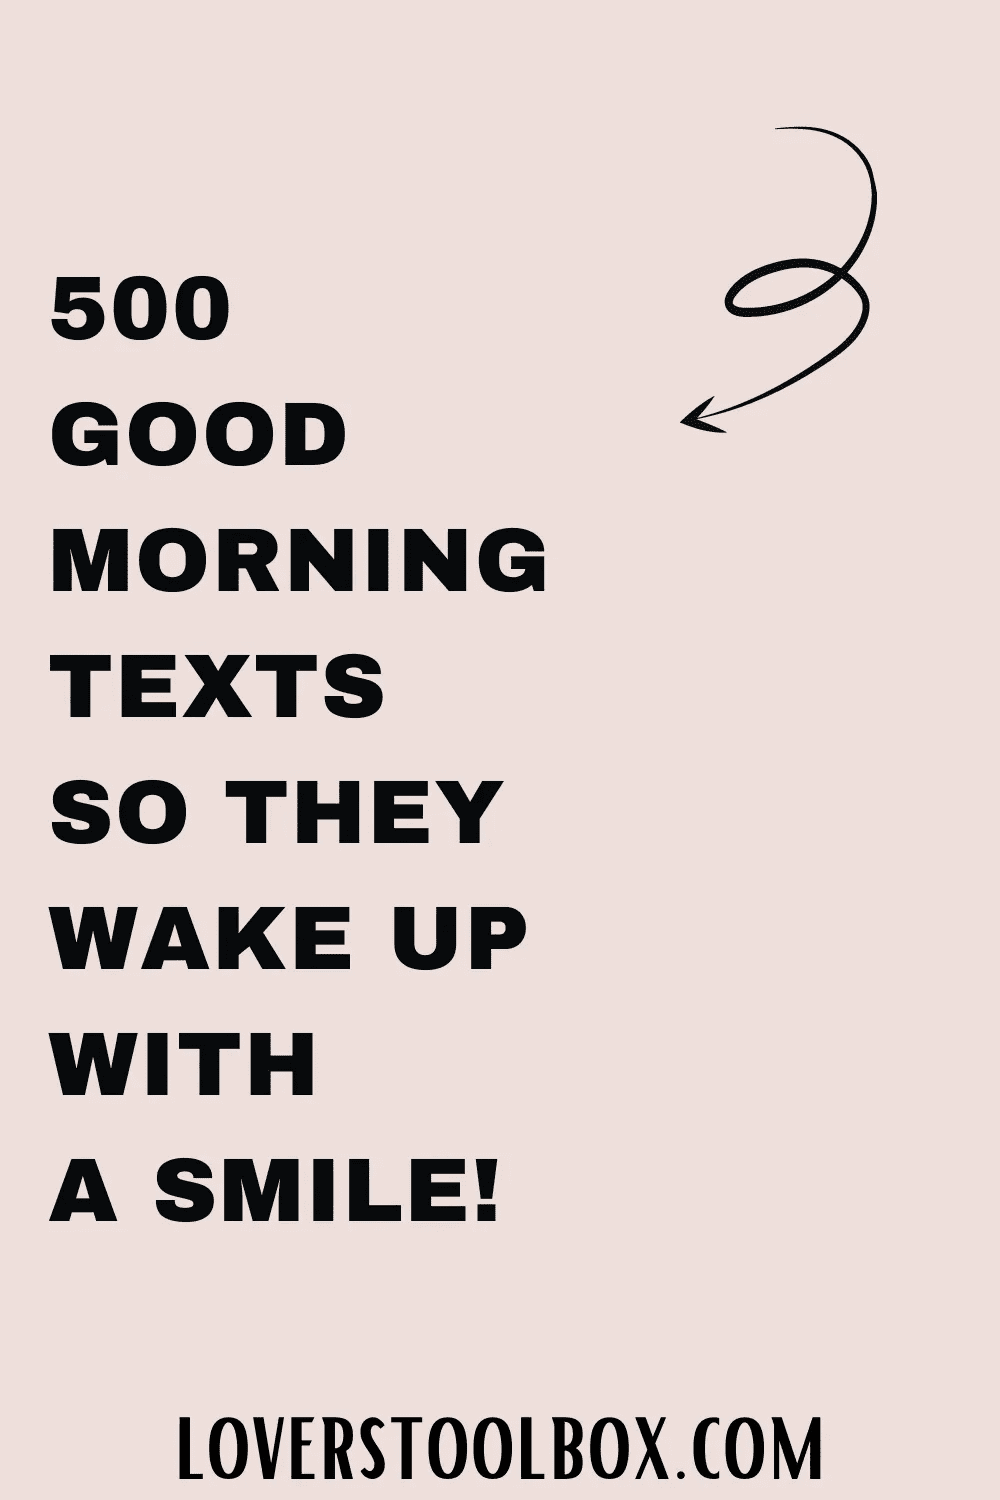 500 Good Morning Texts So They Wake Up With A Smile!